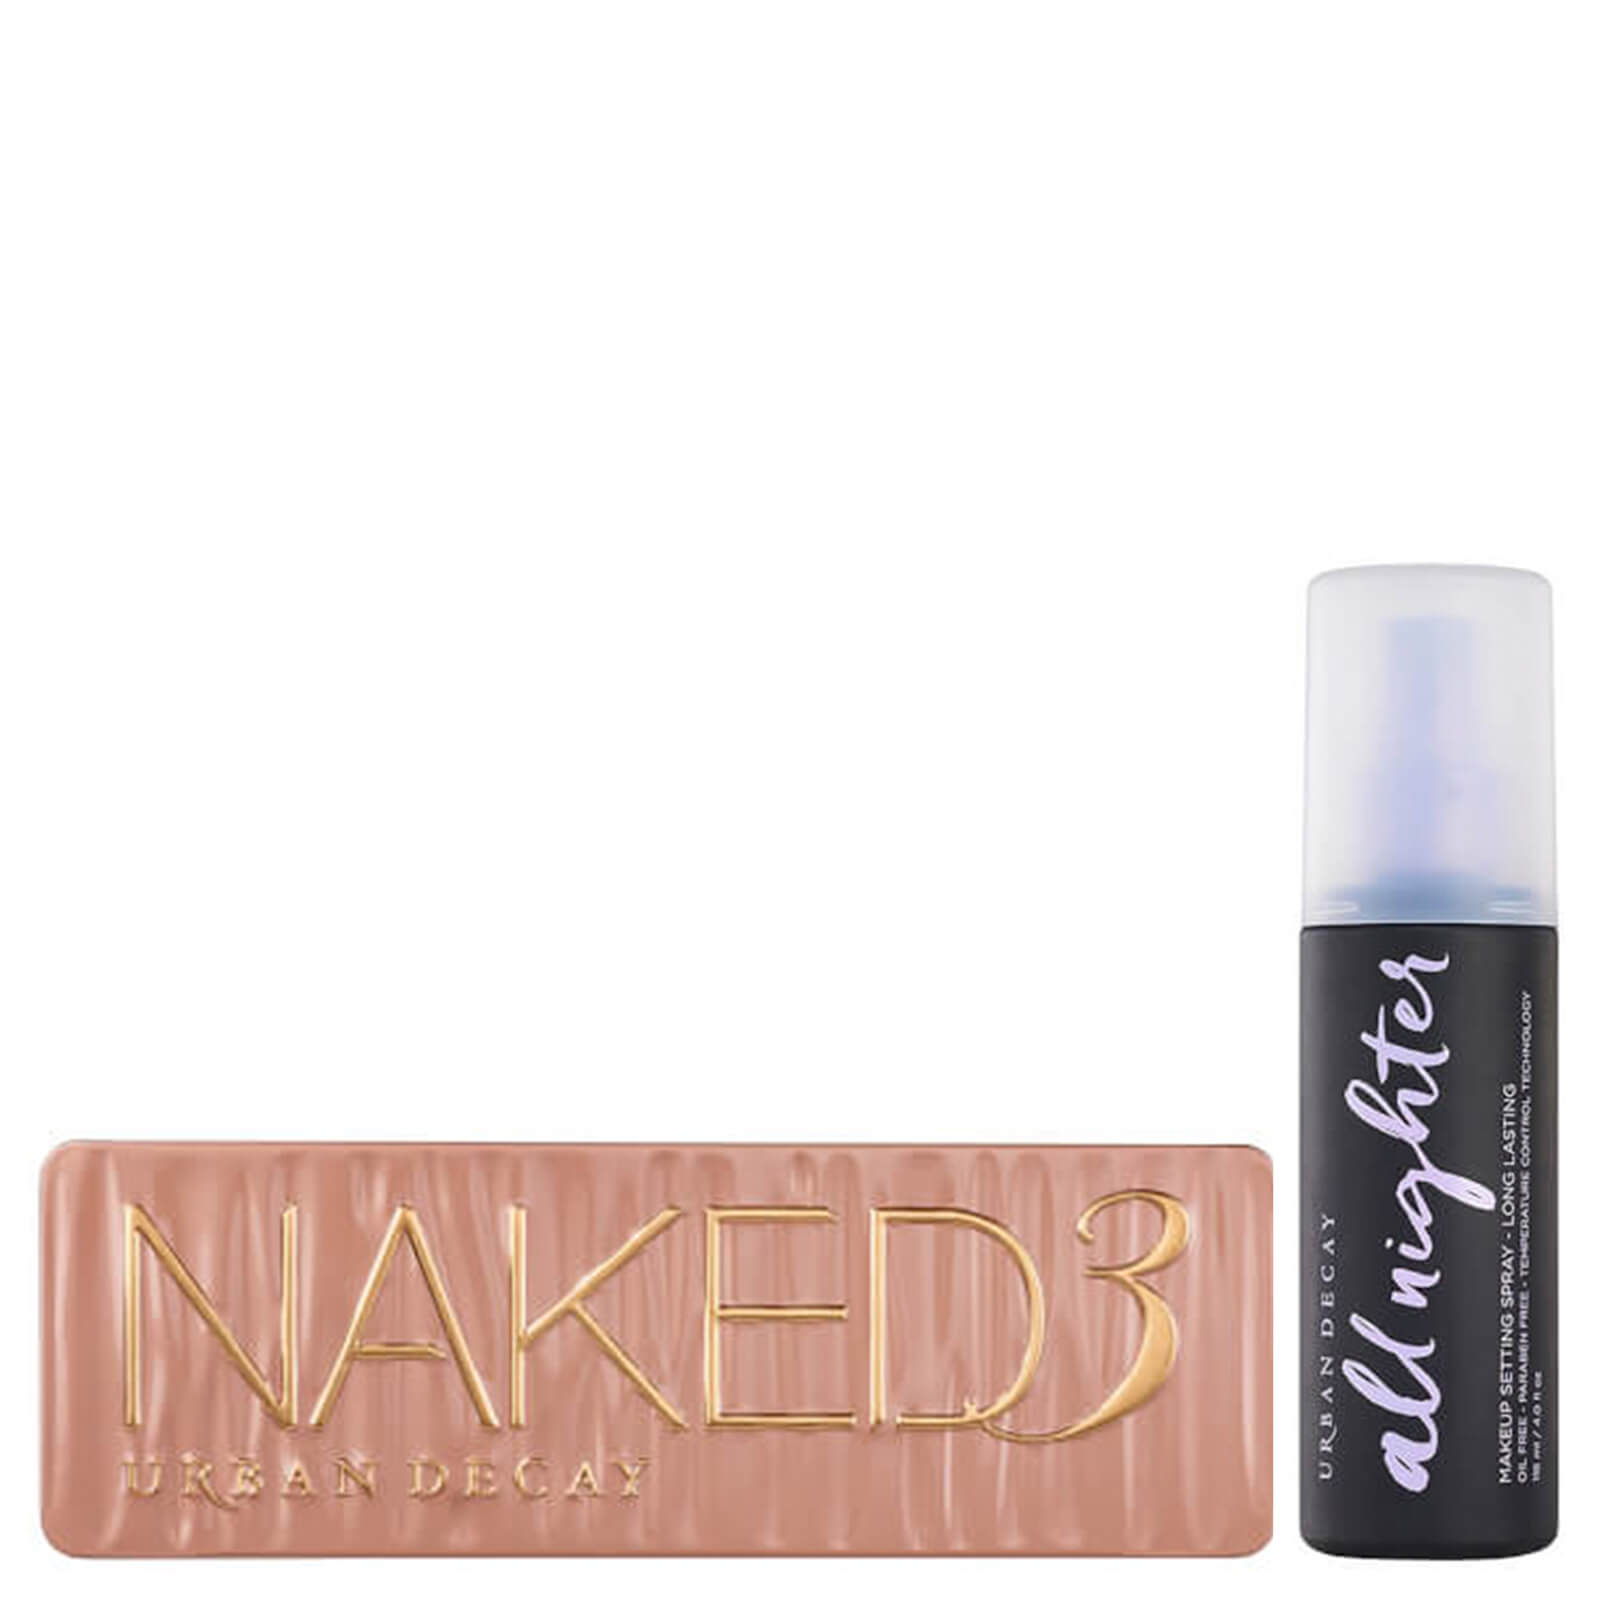 Urban Decay Naked 3 Palette and Setting Spray Bundle von Urban Decay